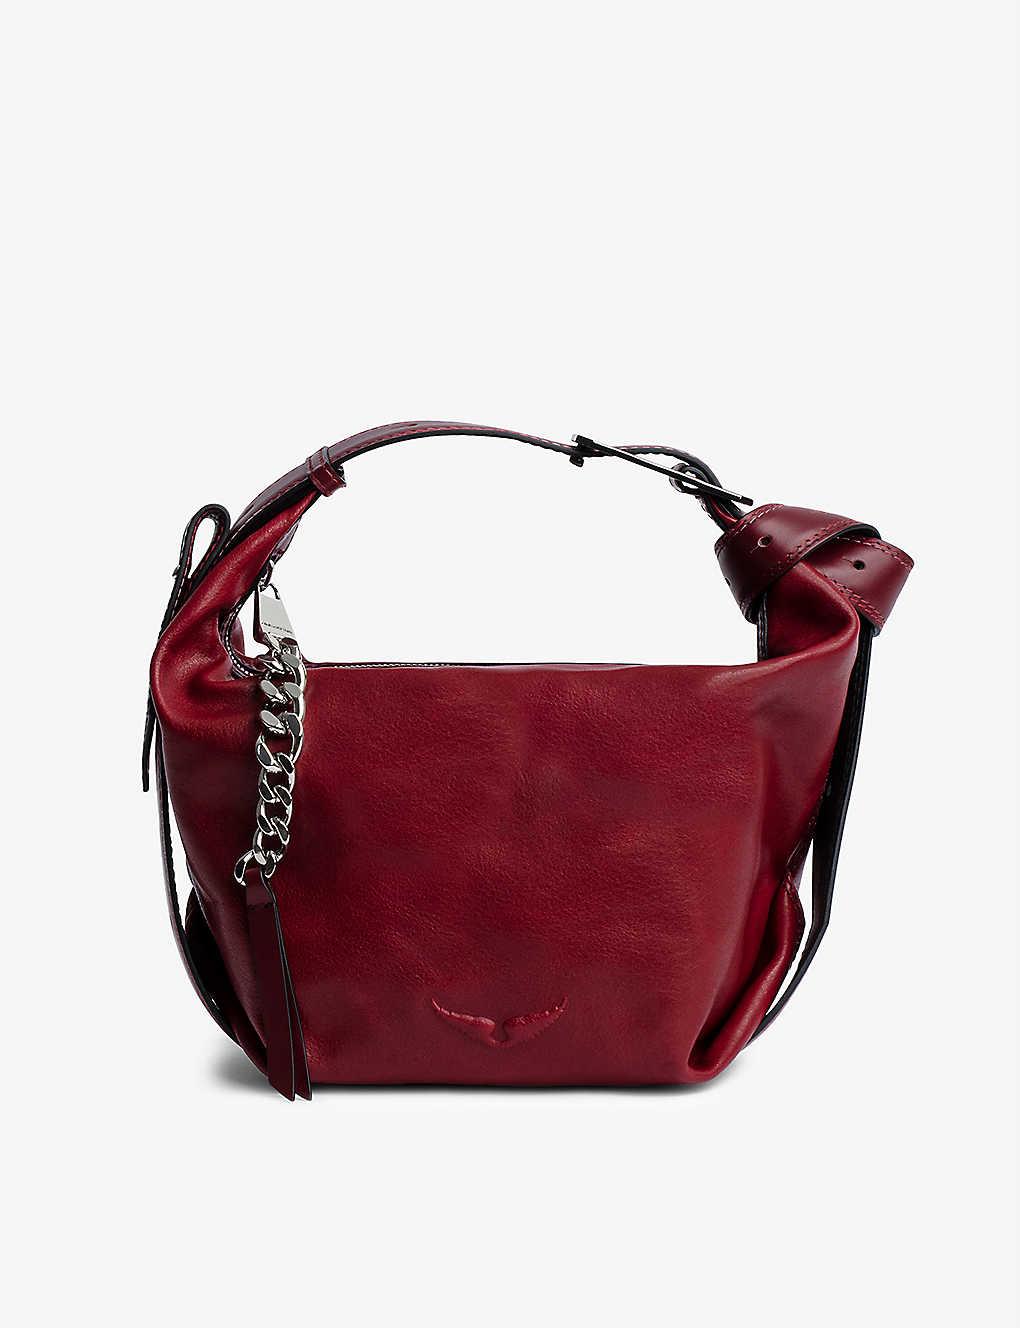 Le Bag Cecilia Zadig Chain-detail & Voltaire in | Red Lyst Shoulder Leather